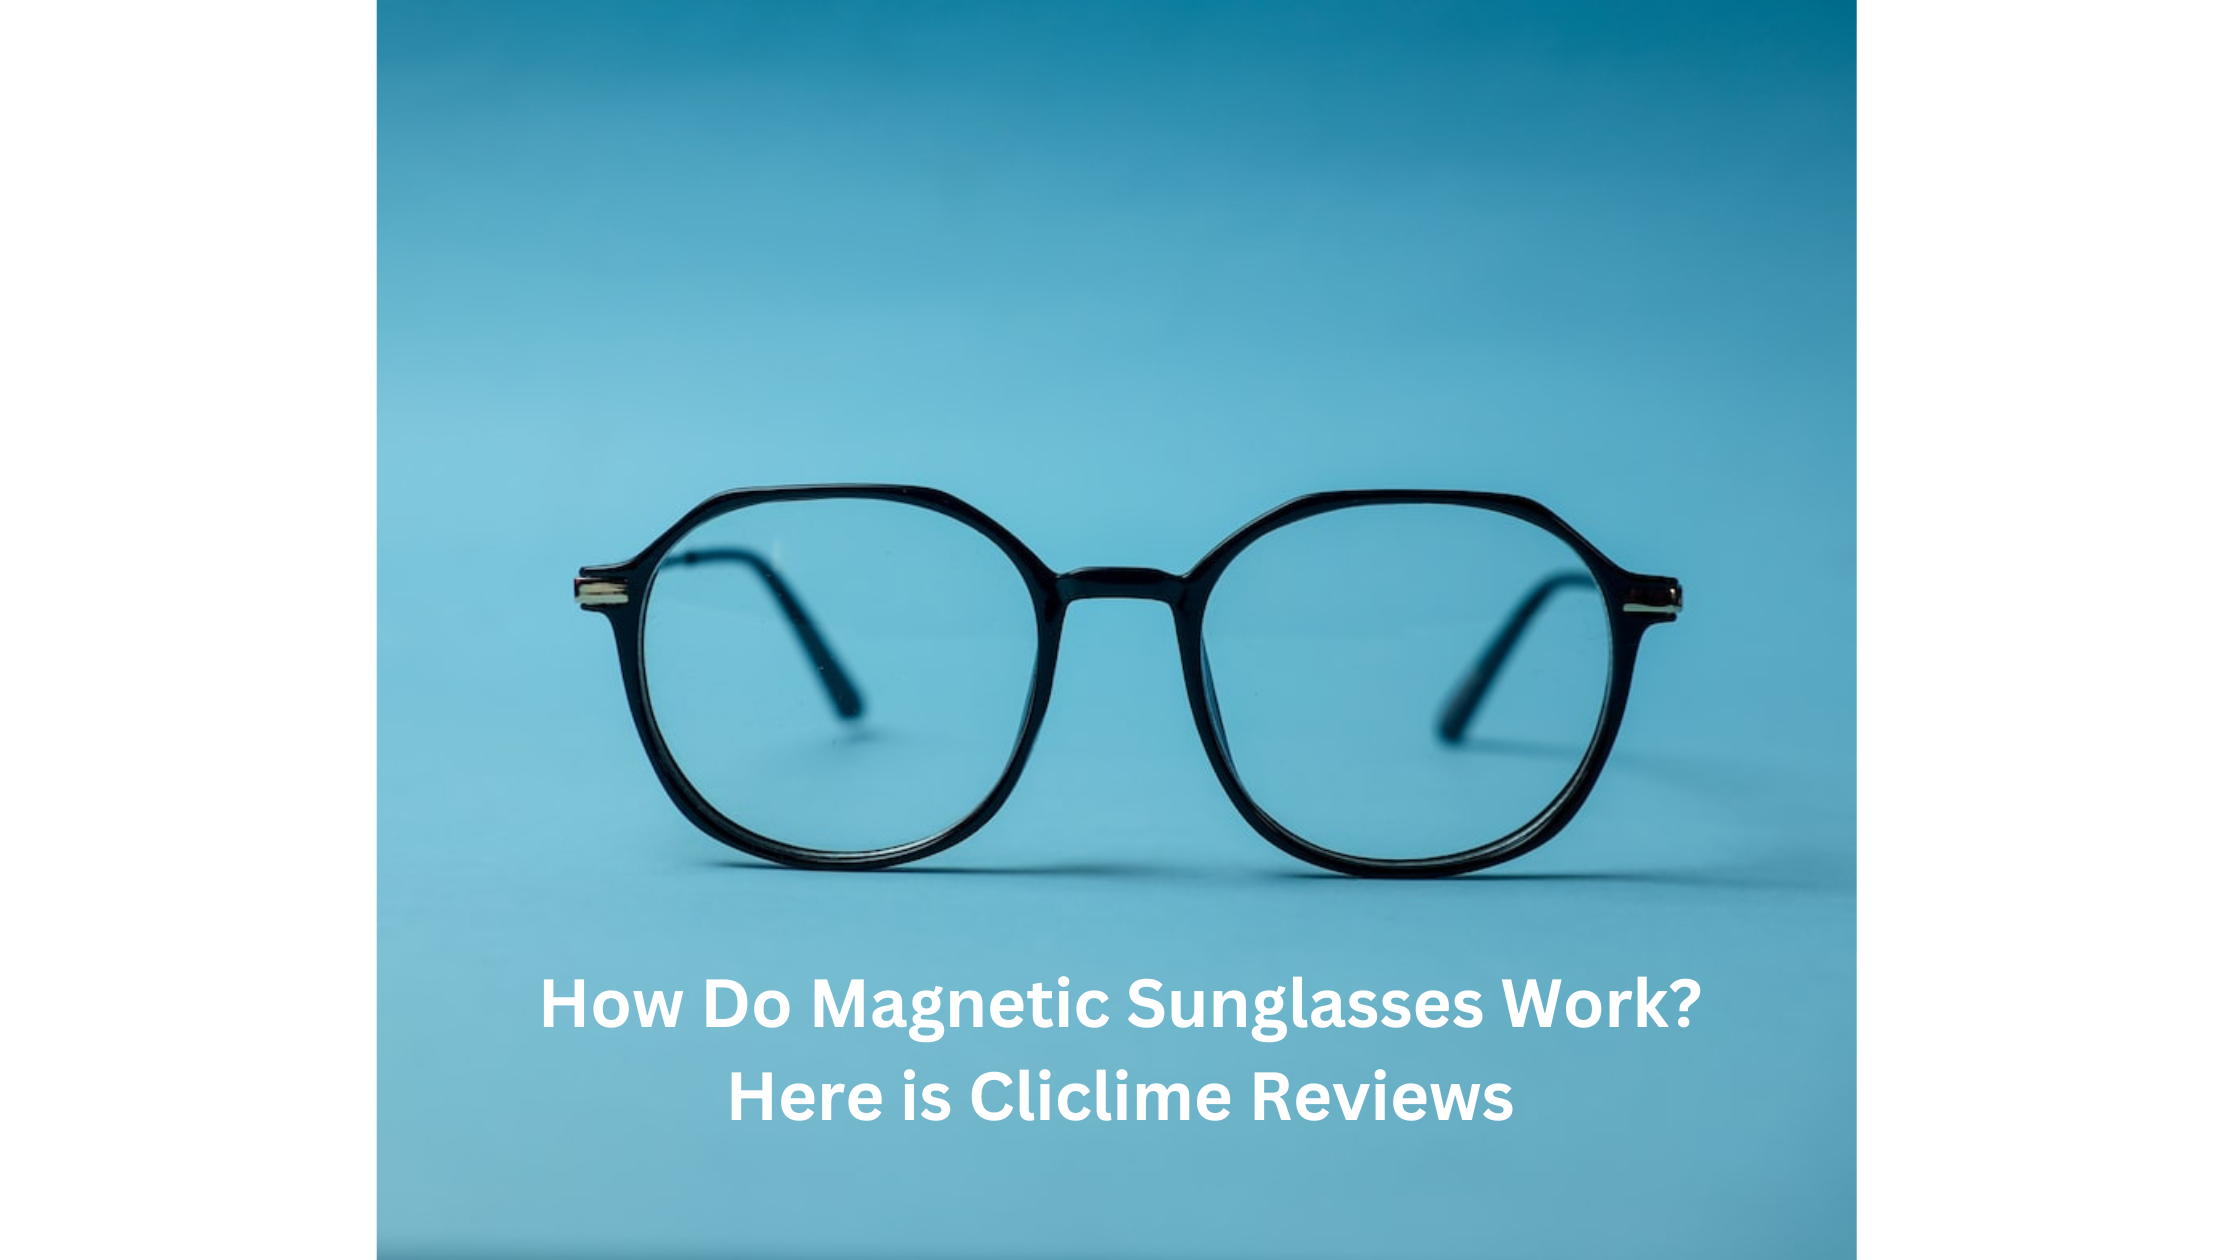 How Do Magnetic Sunglasses Work? Here is Cliclime Reviews